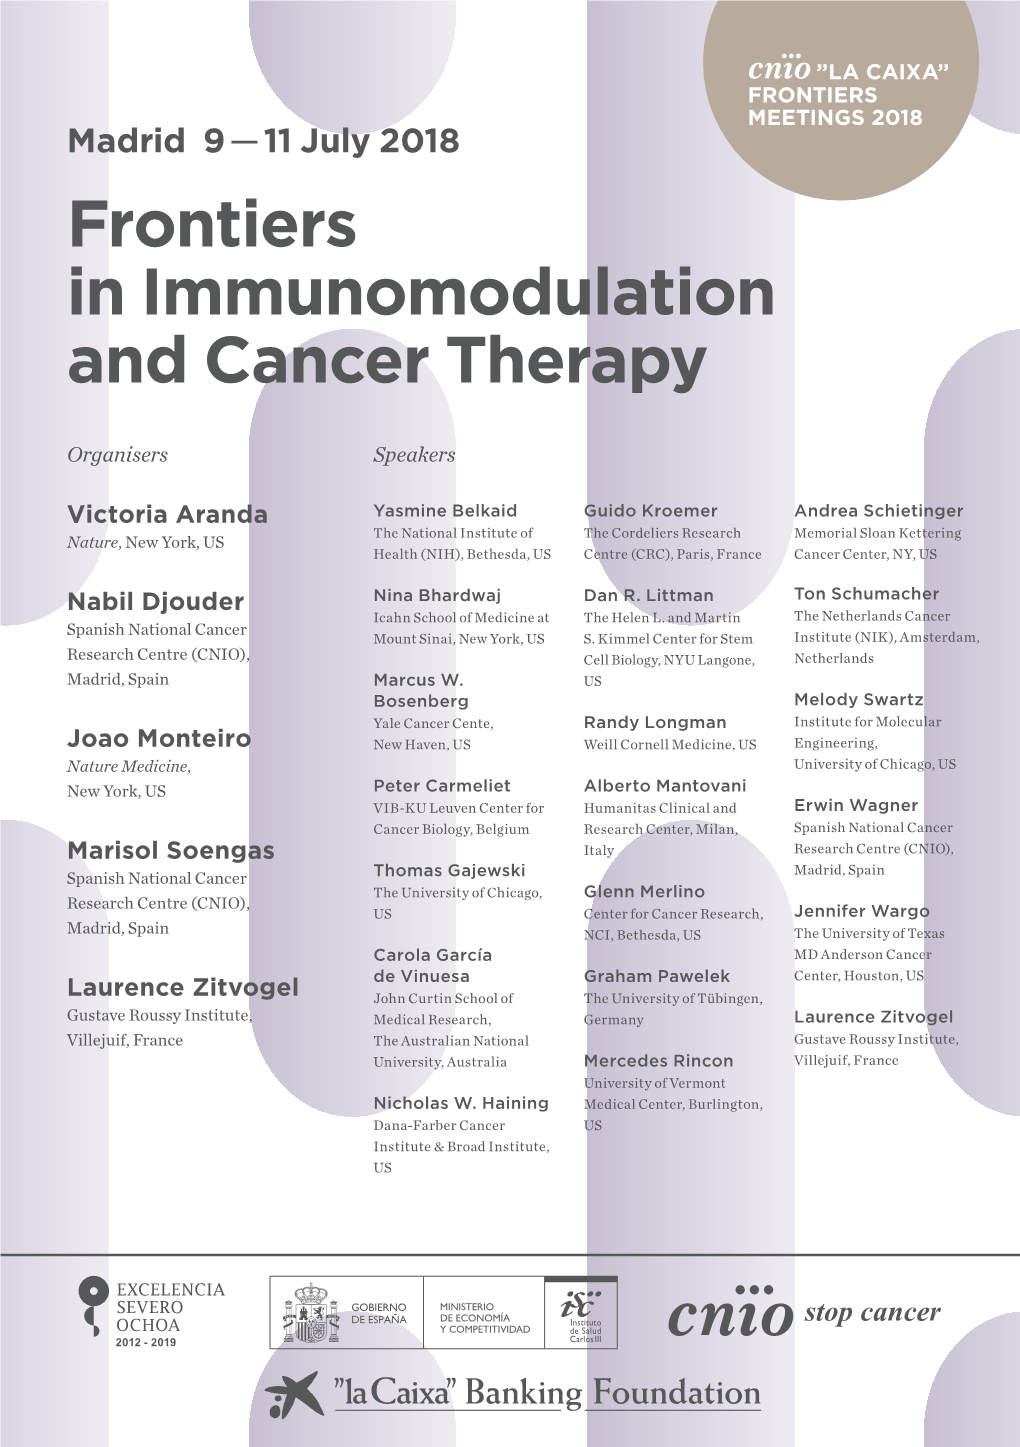 Frontiers in Immunomodulation and Cancer Therapy